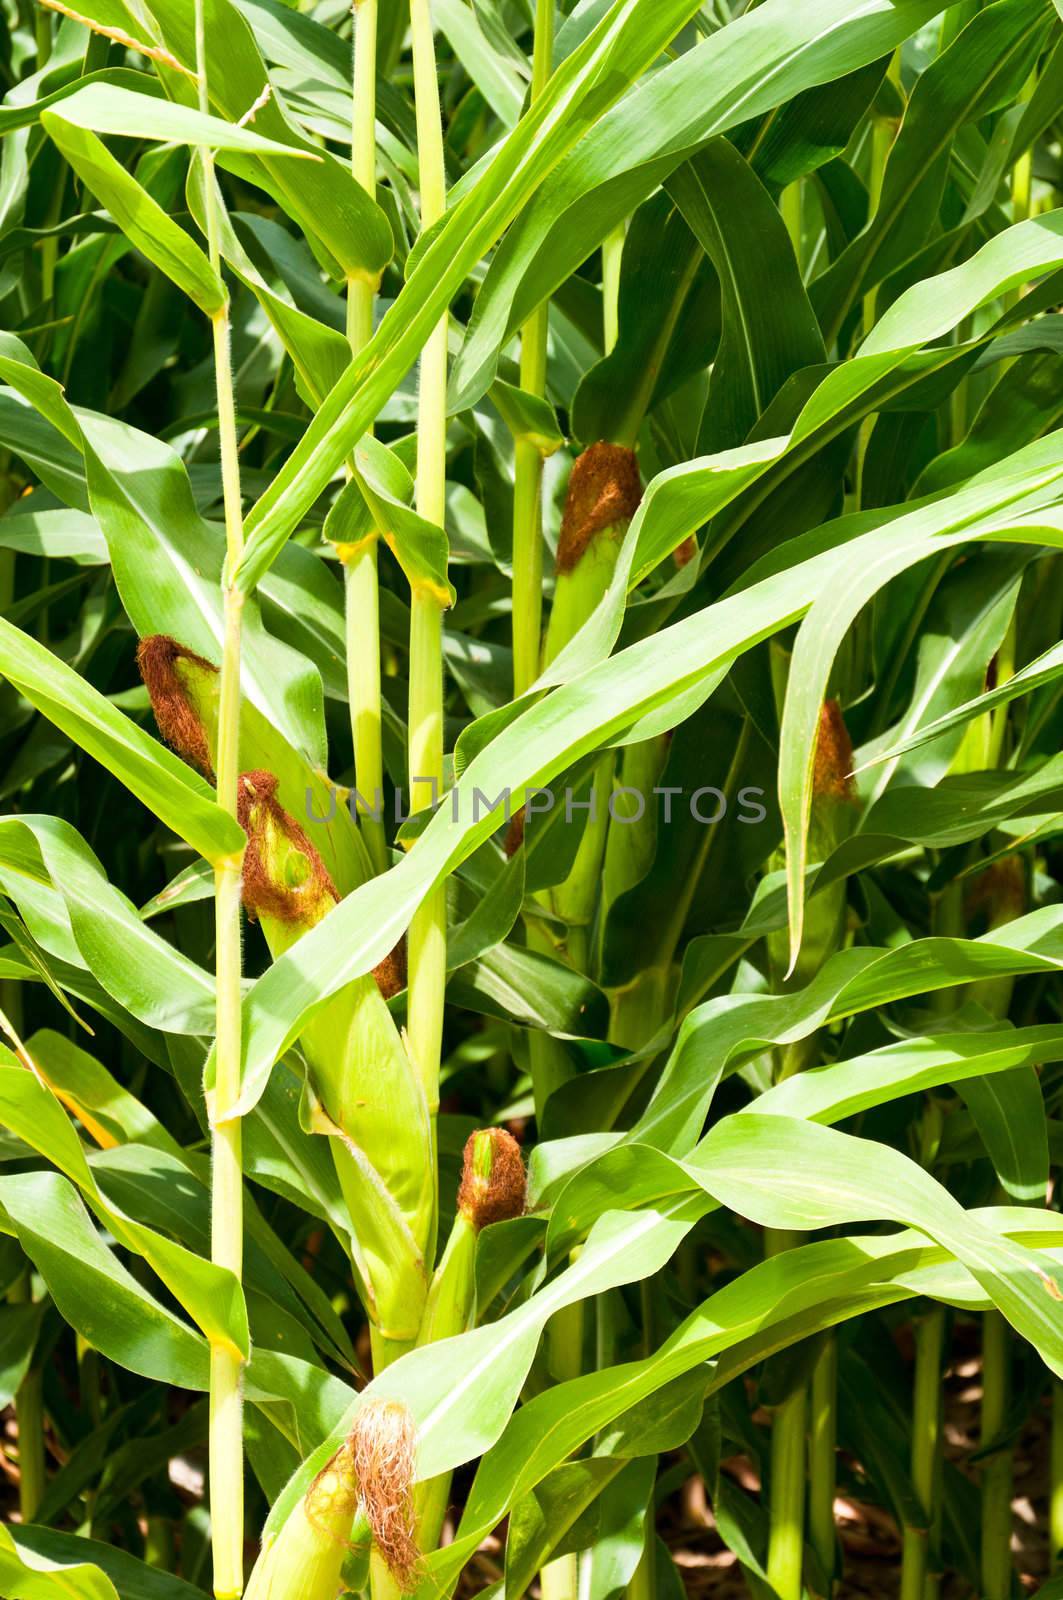 Close up view of young corncobs still on the stalks not yet ready for harvest